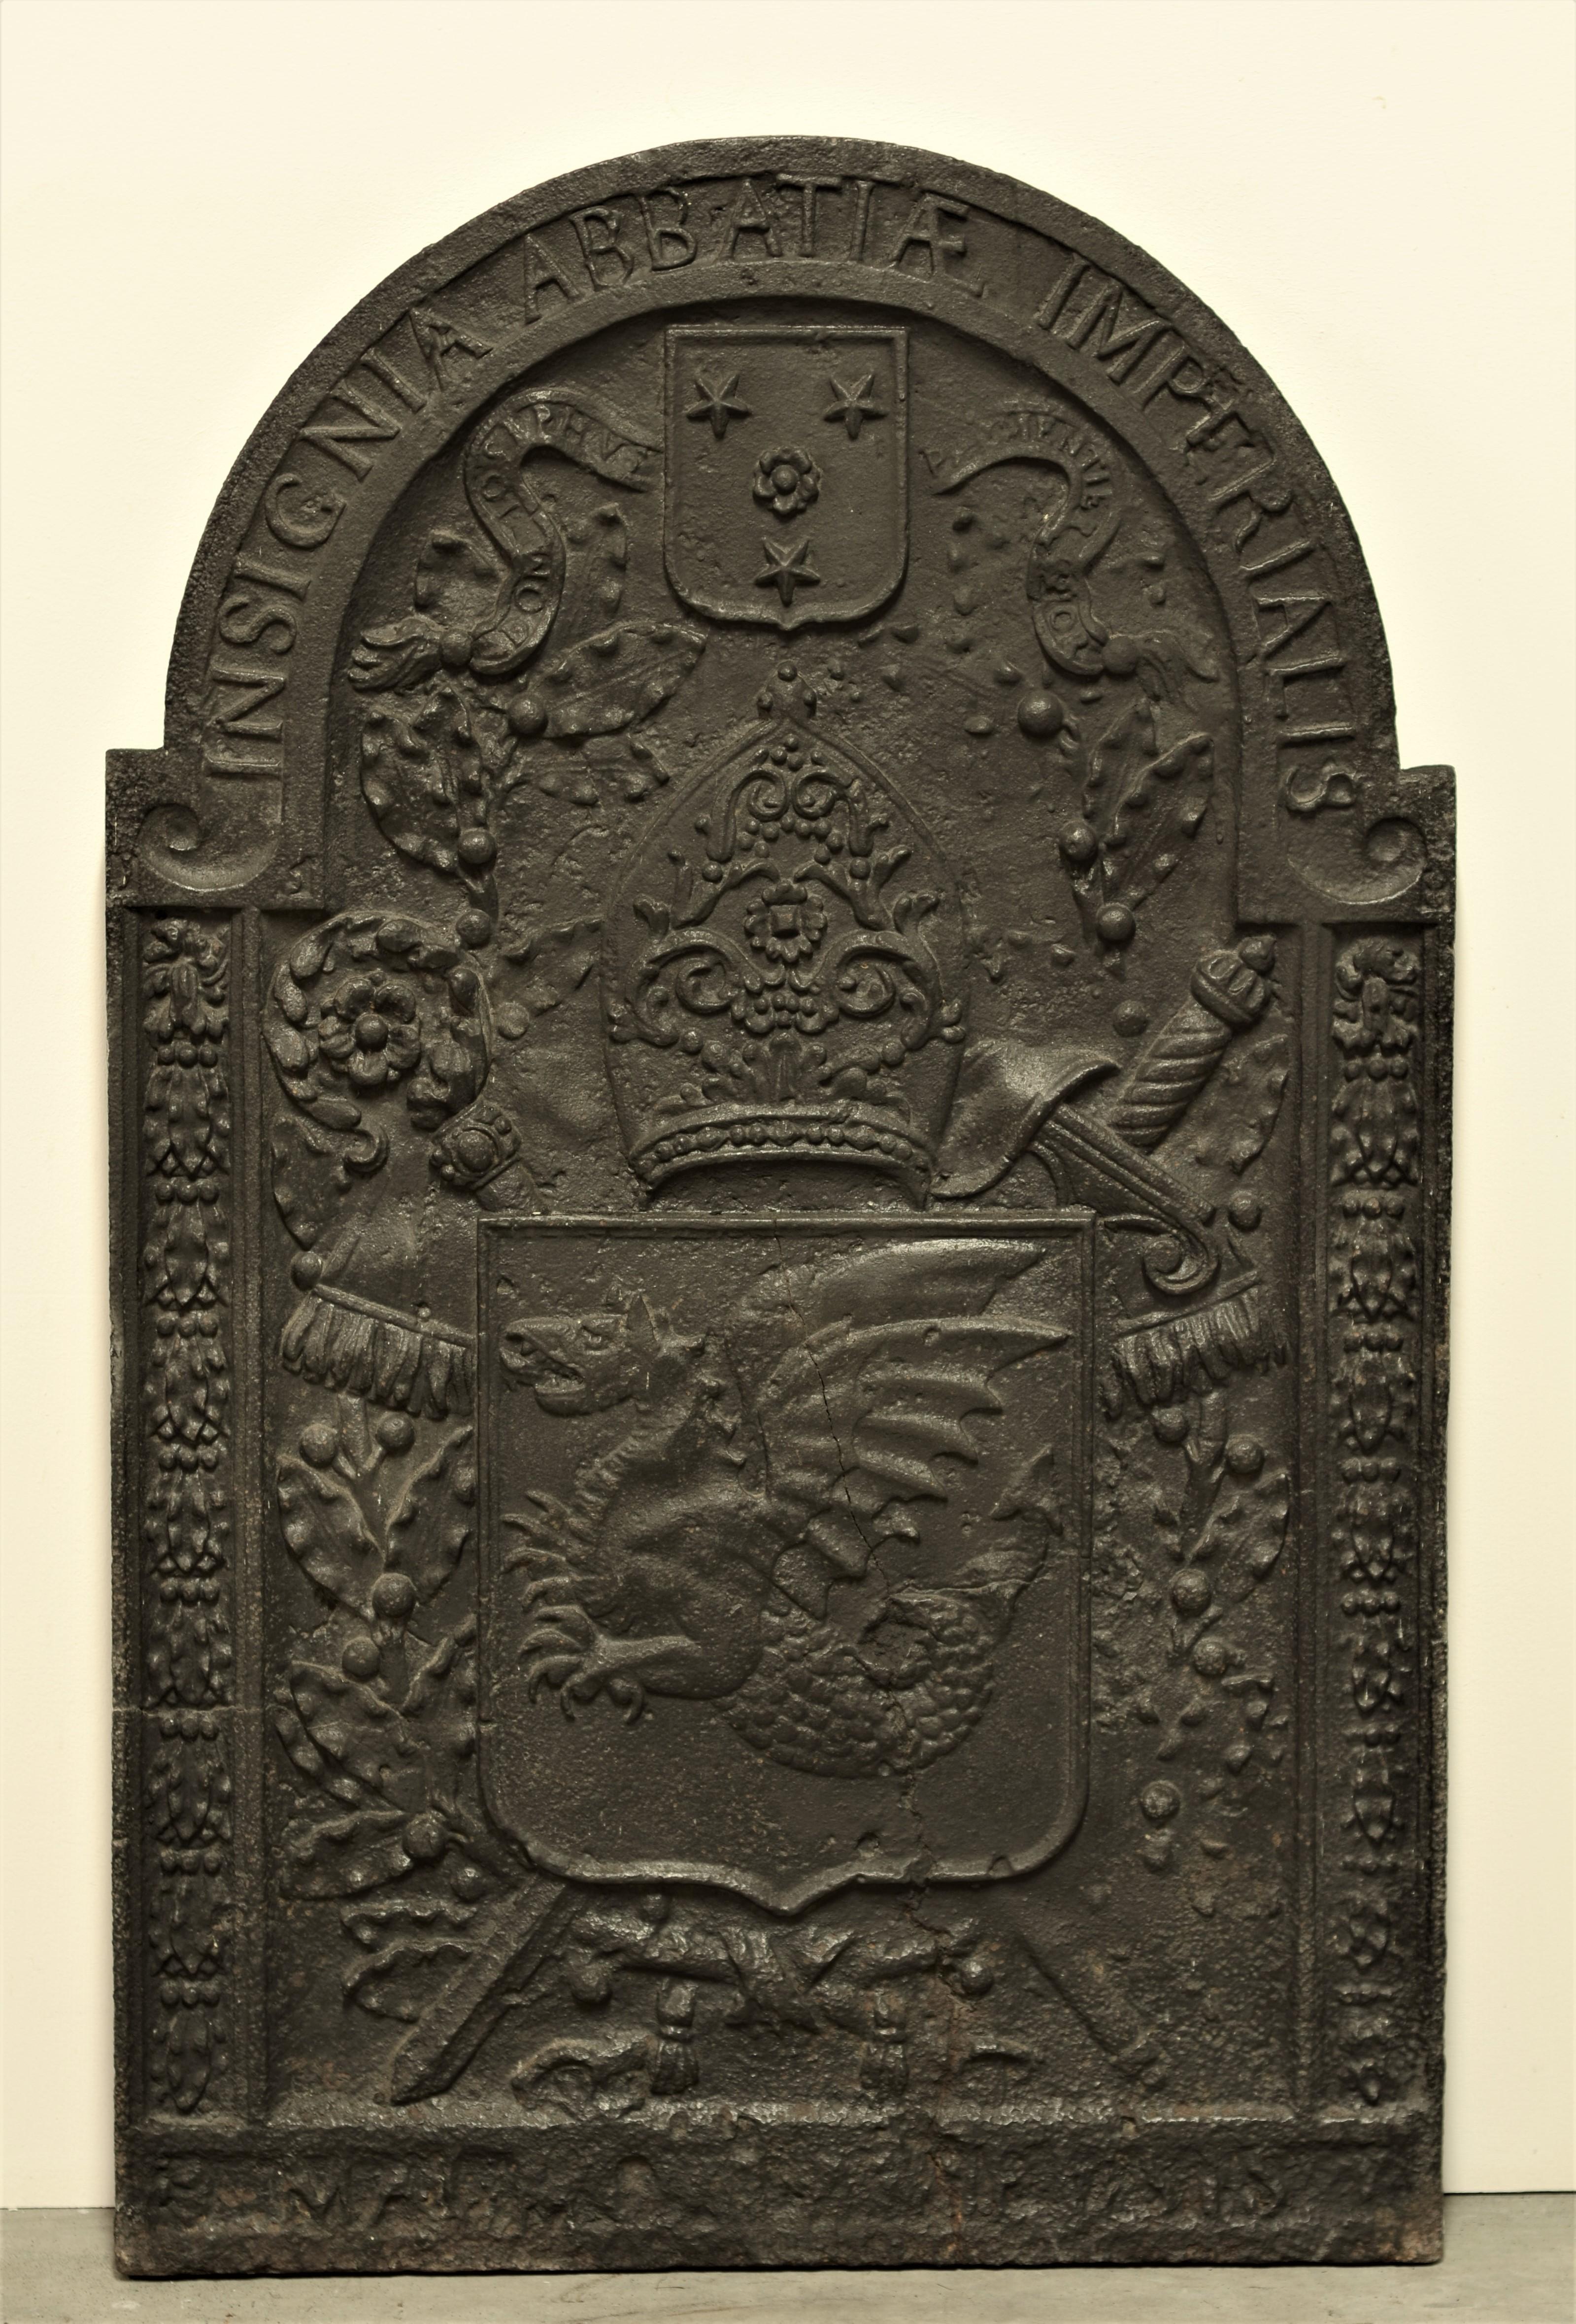 Unique 17th century cast iron fireback or backsplash.

This tall fireback is beautifully and strong decorated with a dragon on a shield with sword, between floral columns and below crested miter and shield.

Sign on top 